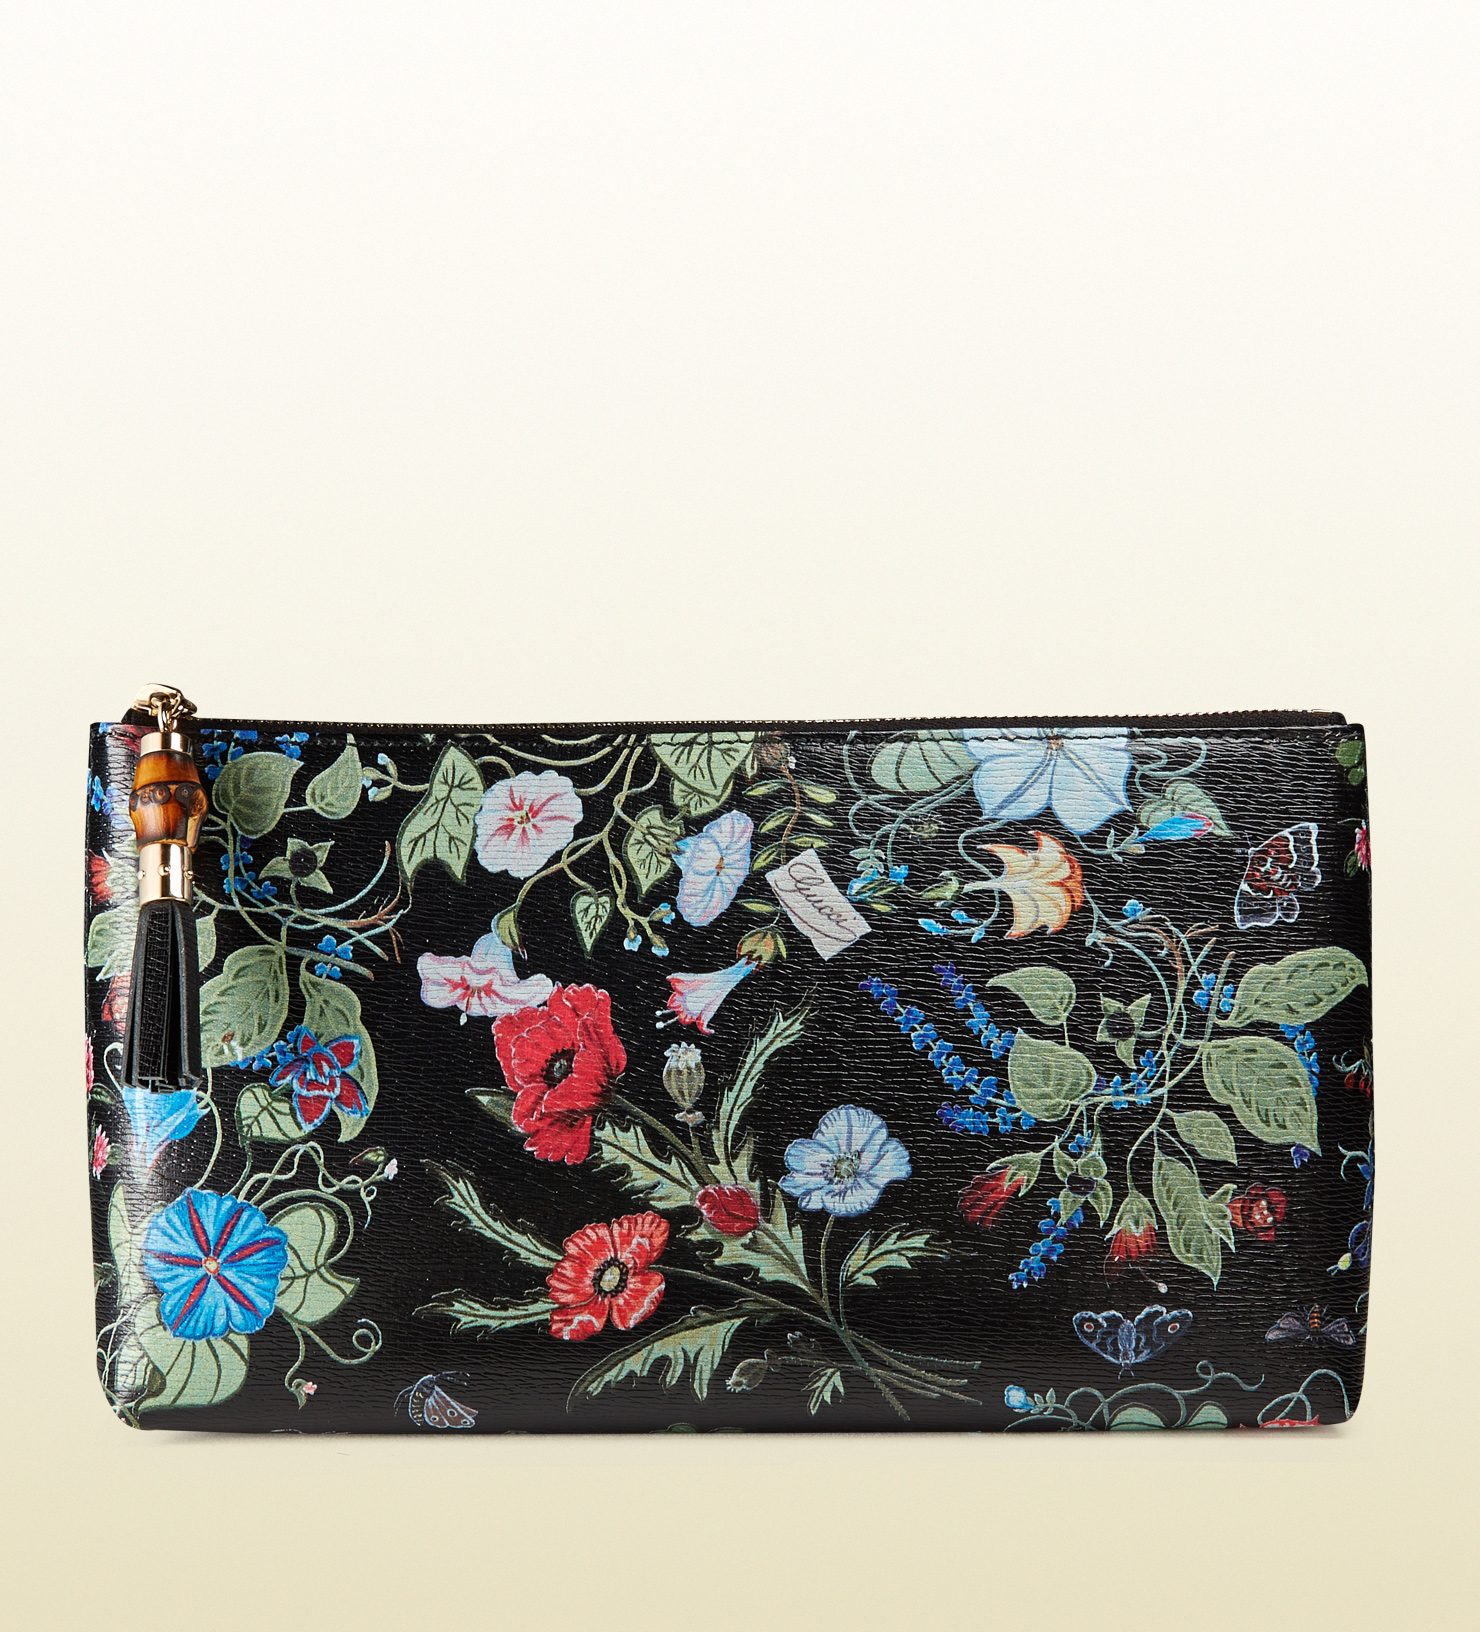 Gucci Flora Knight Print Leather Pouch in Black for Men - Lyst